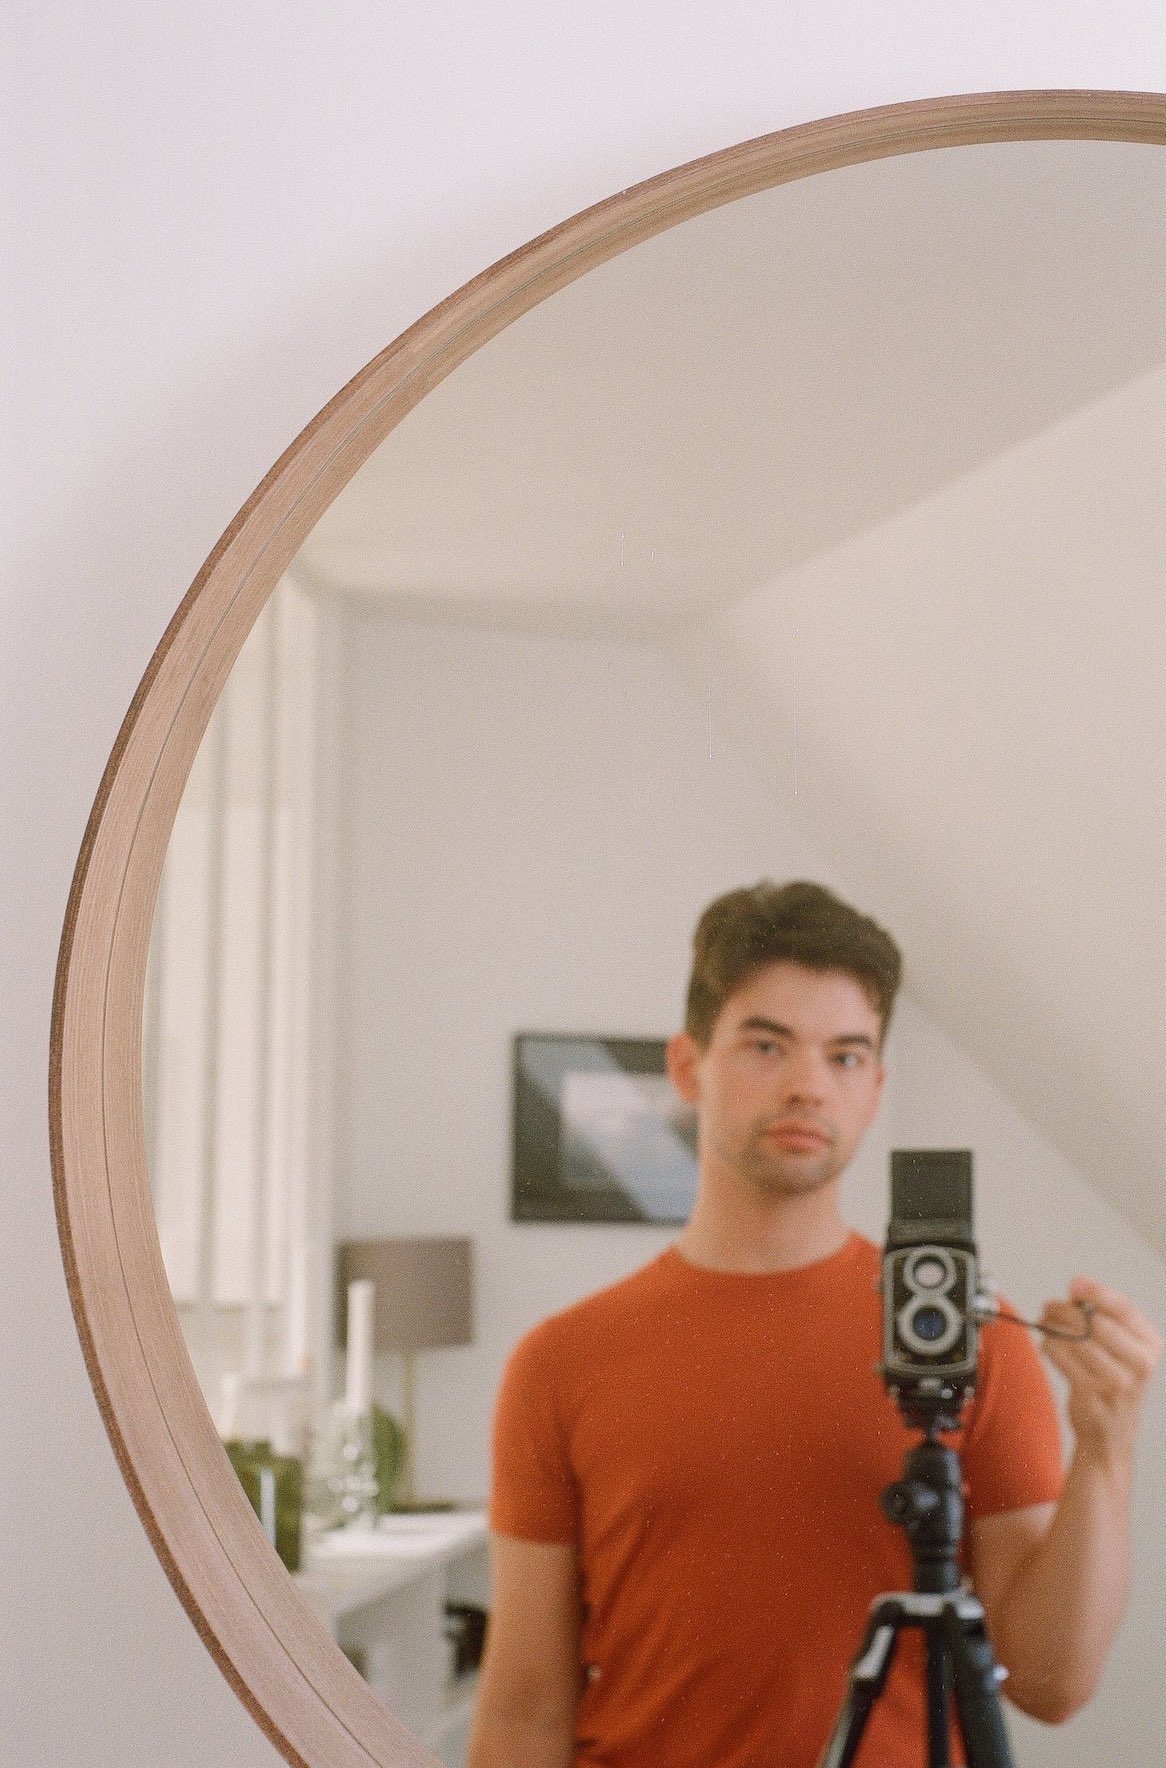 Photo in front of my mirror with one of my vintage cameras